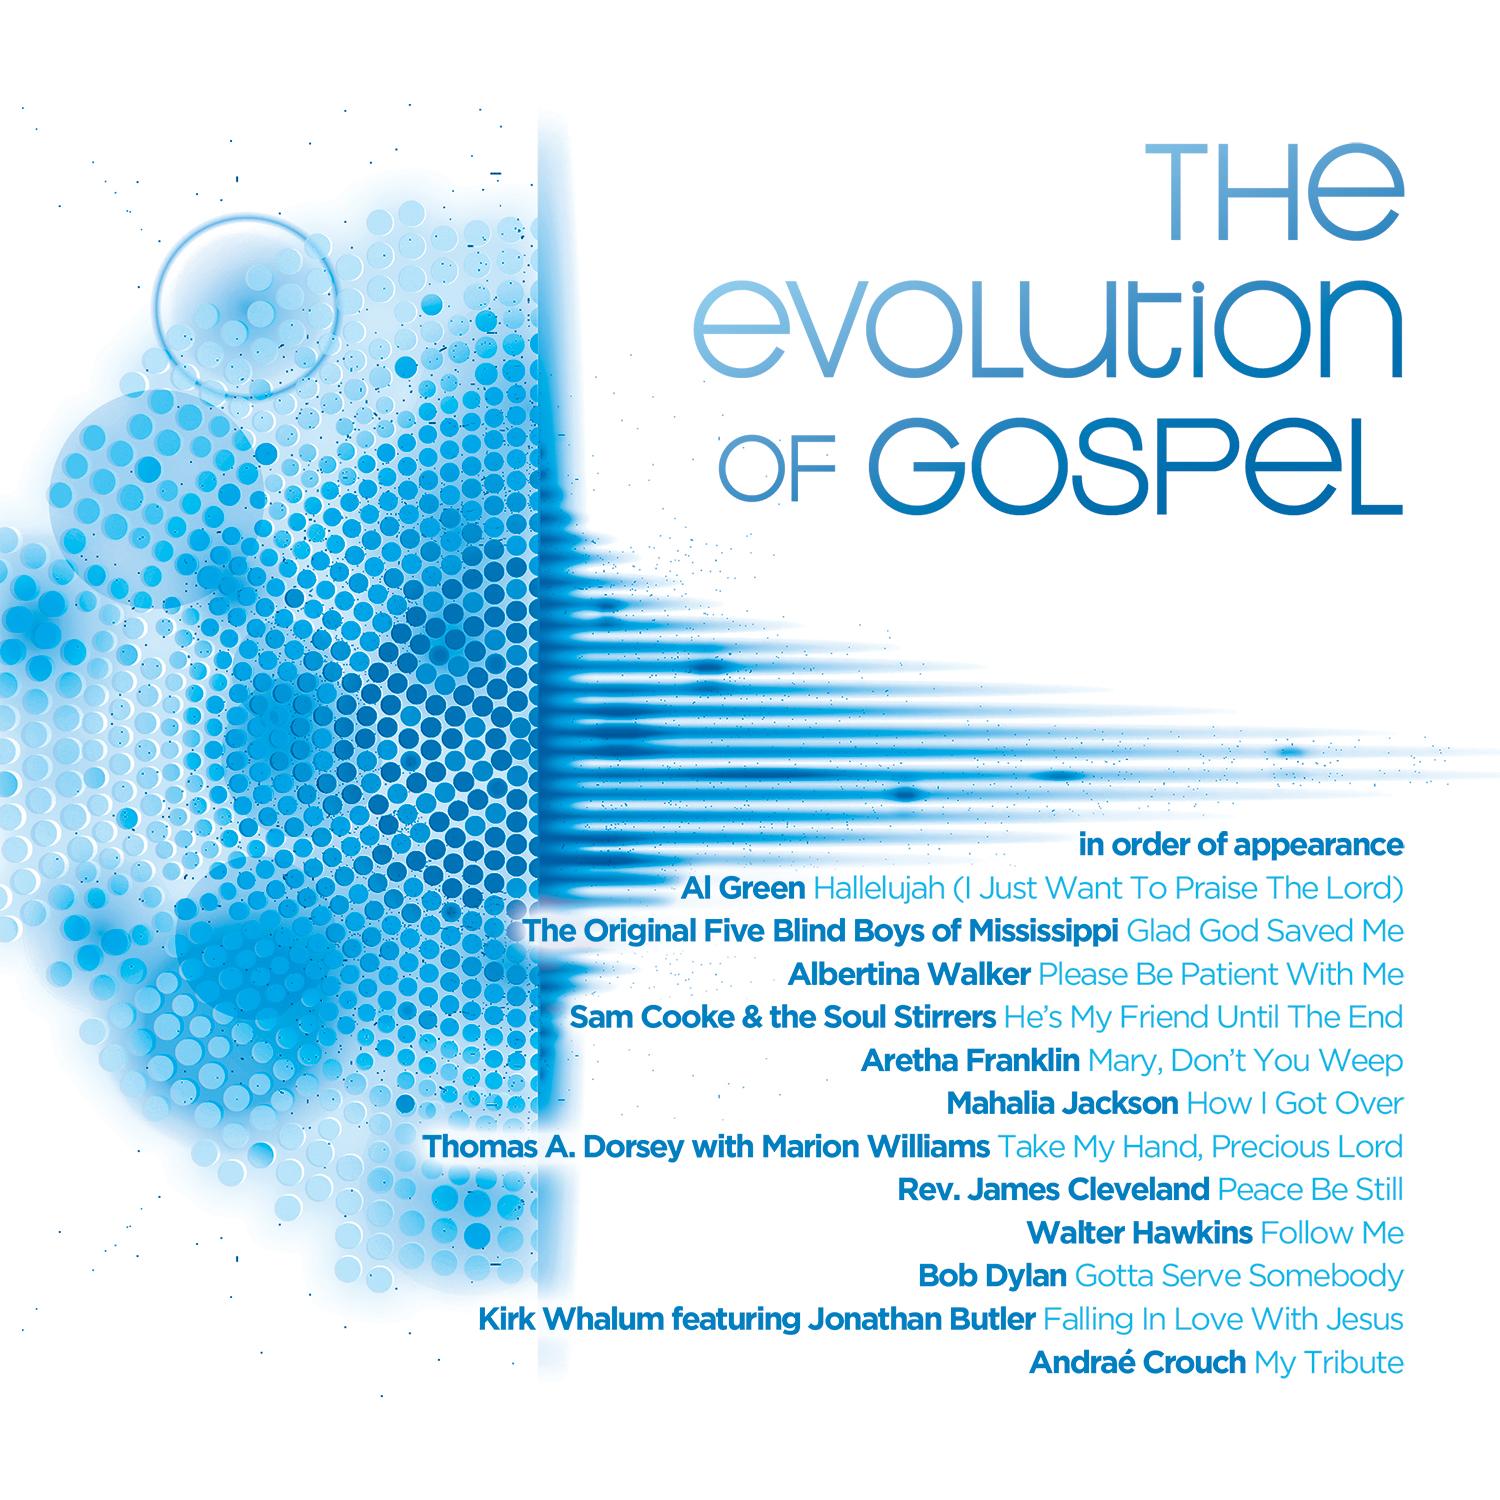 Falling in Love with Jesus (feat. Jonathan Butler)